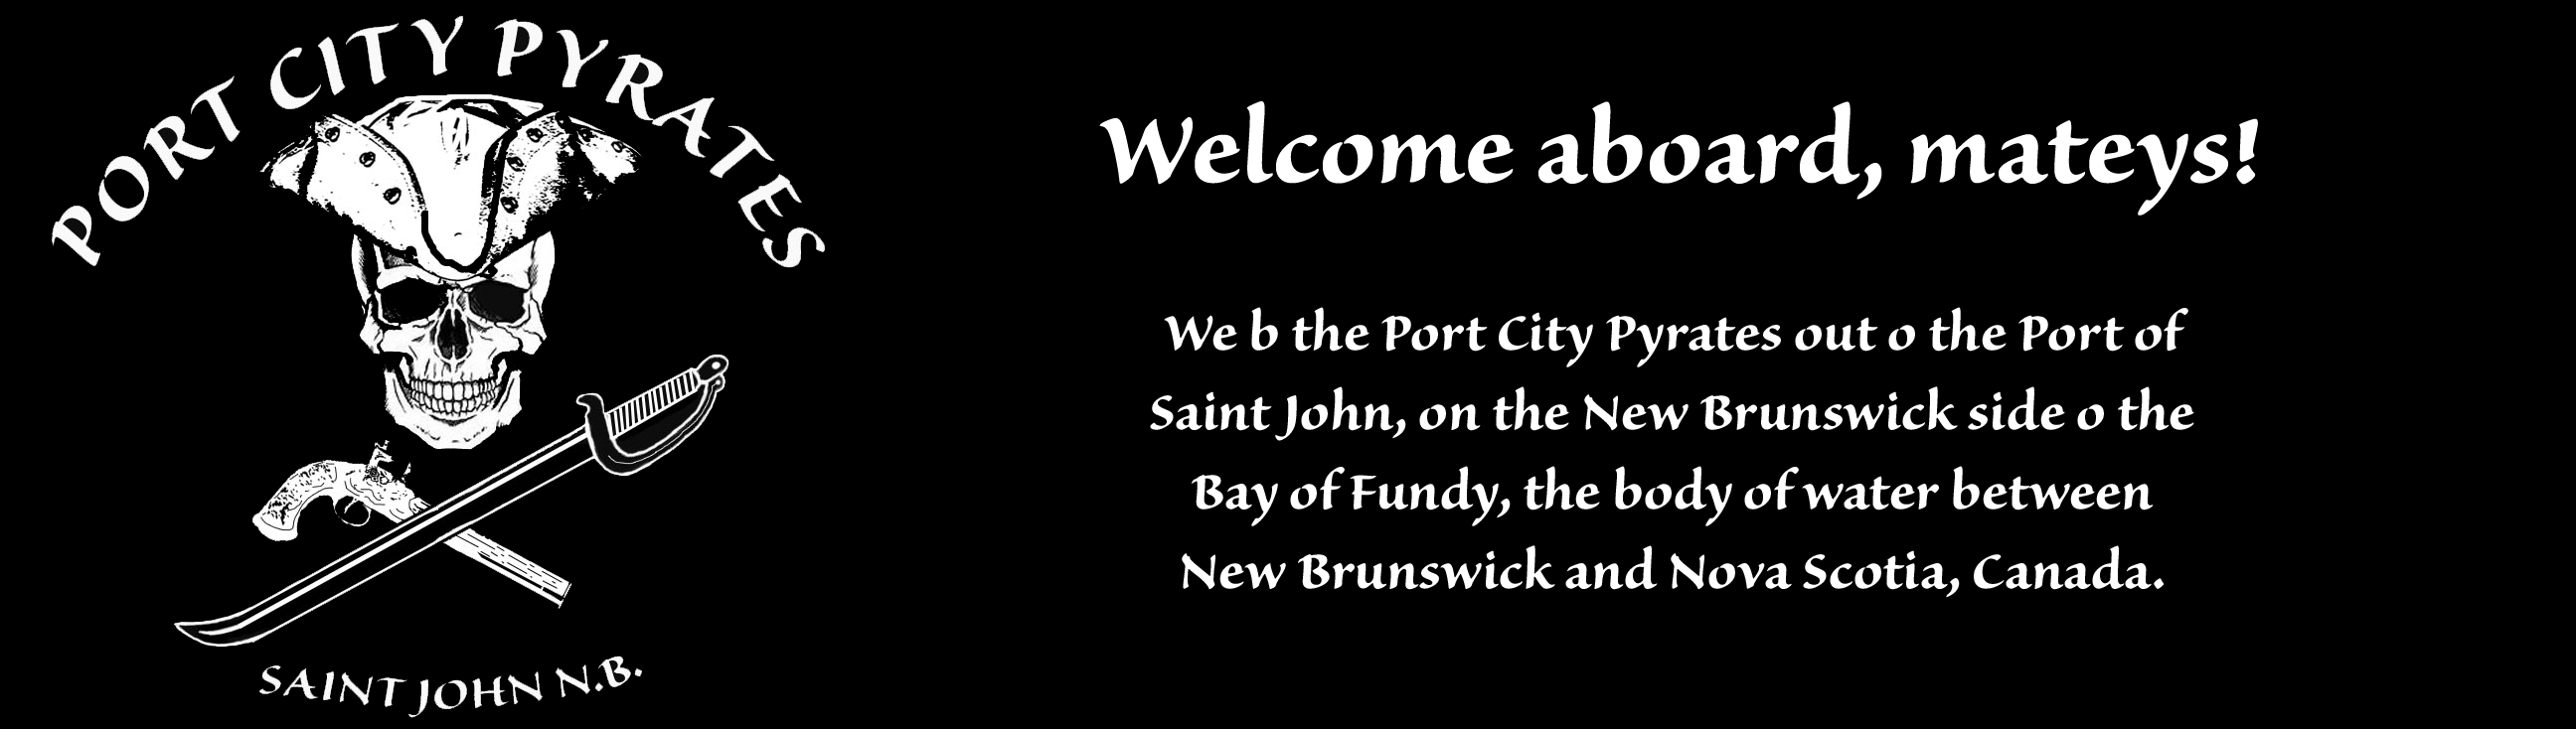 PORT CITY PYRATES Entertainment Group - Most Authentic Pyrates in New Brunswick